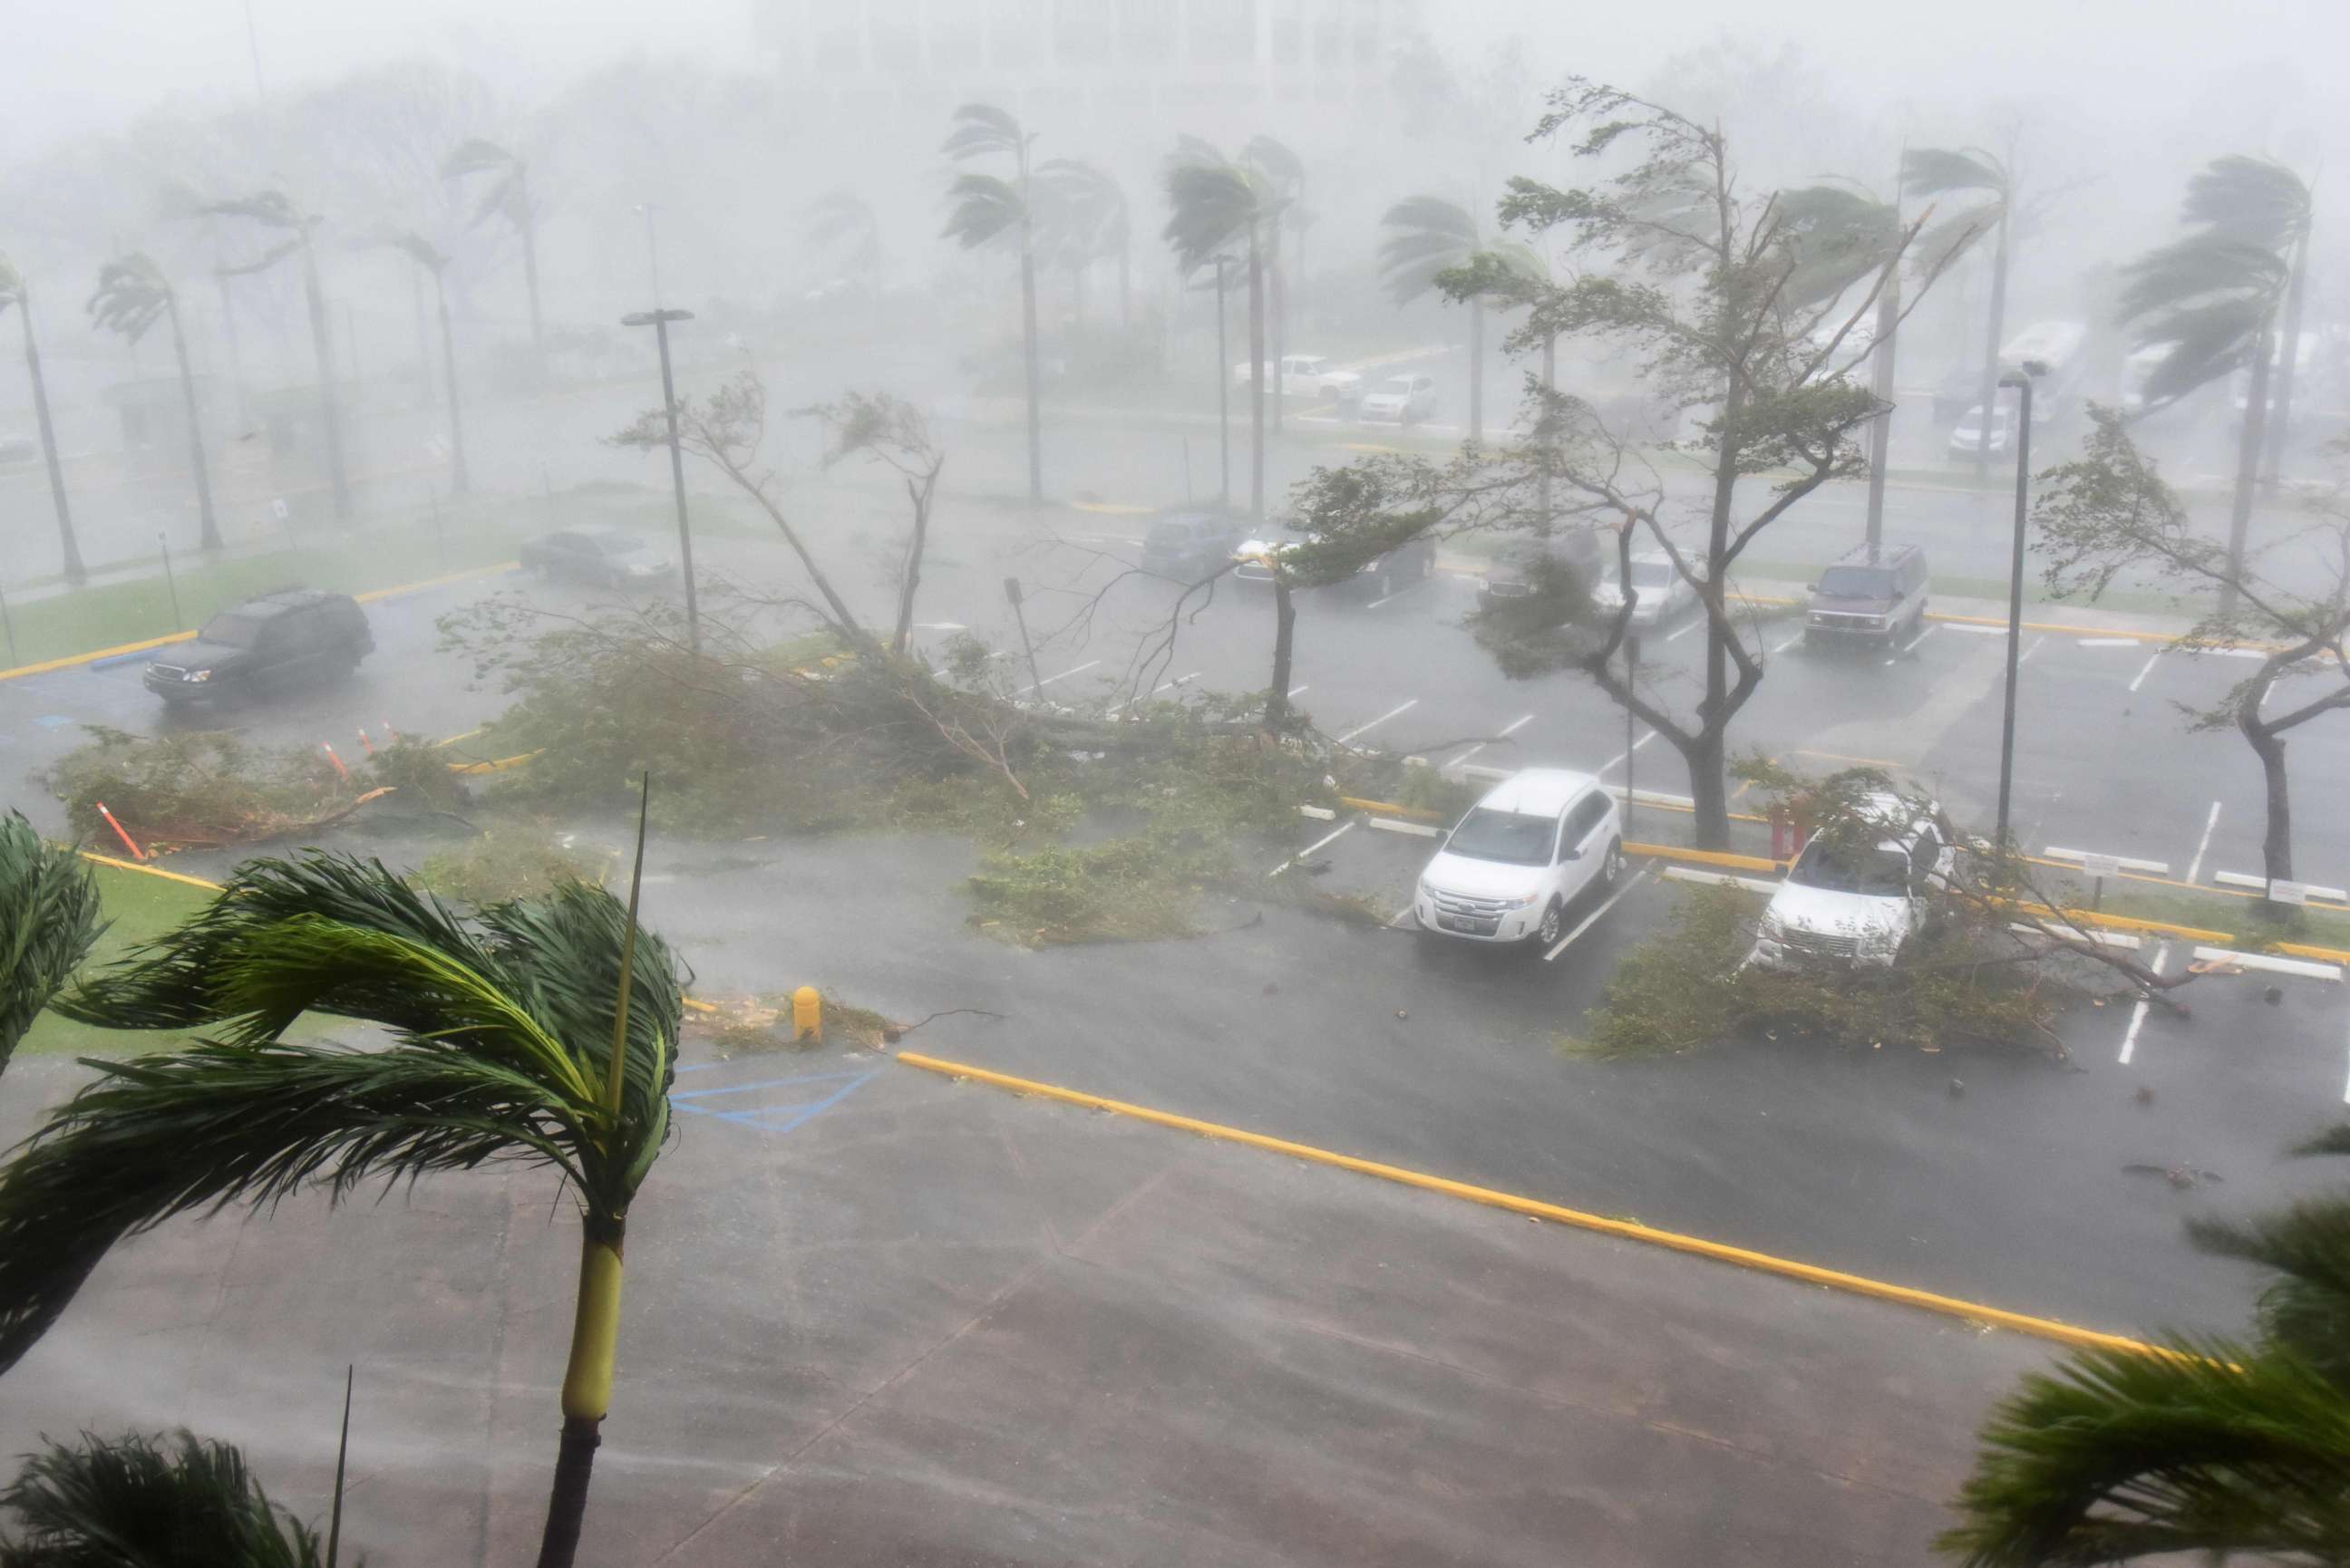 PHOTO: Trees are toppled in a parking lot at Roberto Clemente Coliseum in San Juan, Puerto Rico, Sept. 20, 2017, during the passage of the Hurricane Maria.
